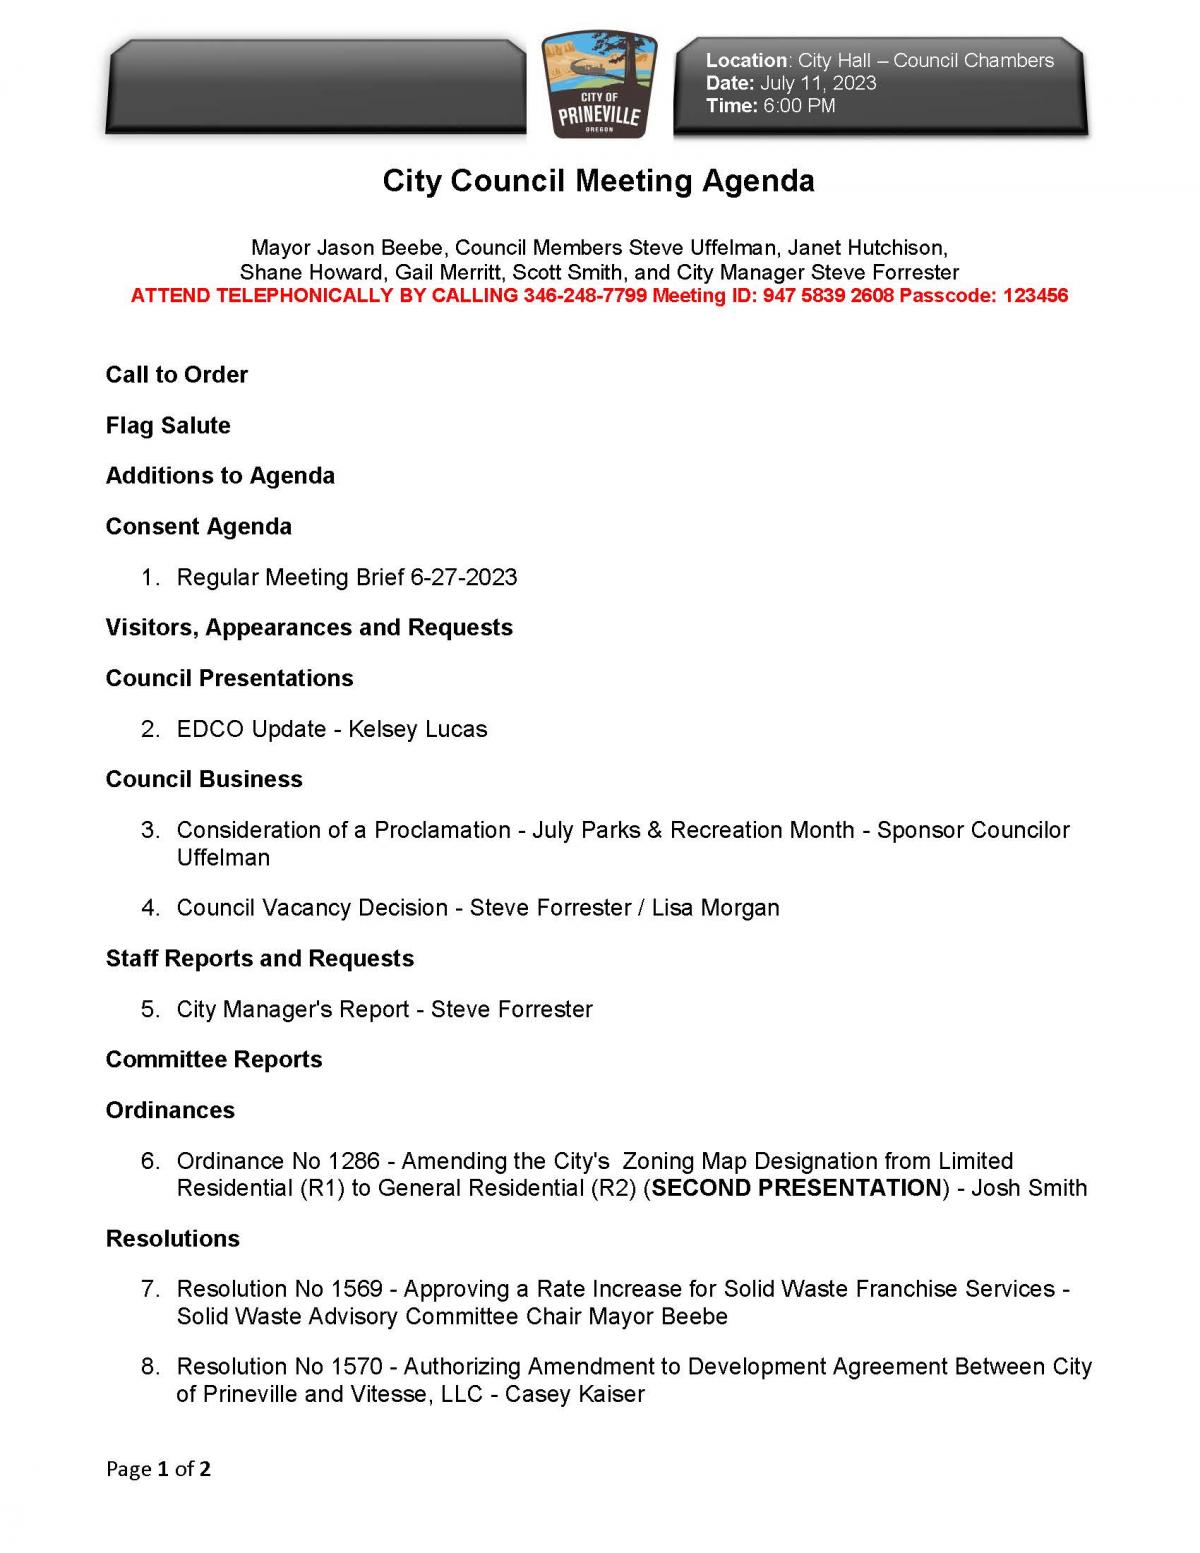 Page 1 of Council Agenda 7-11-2023